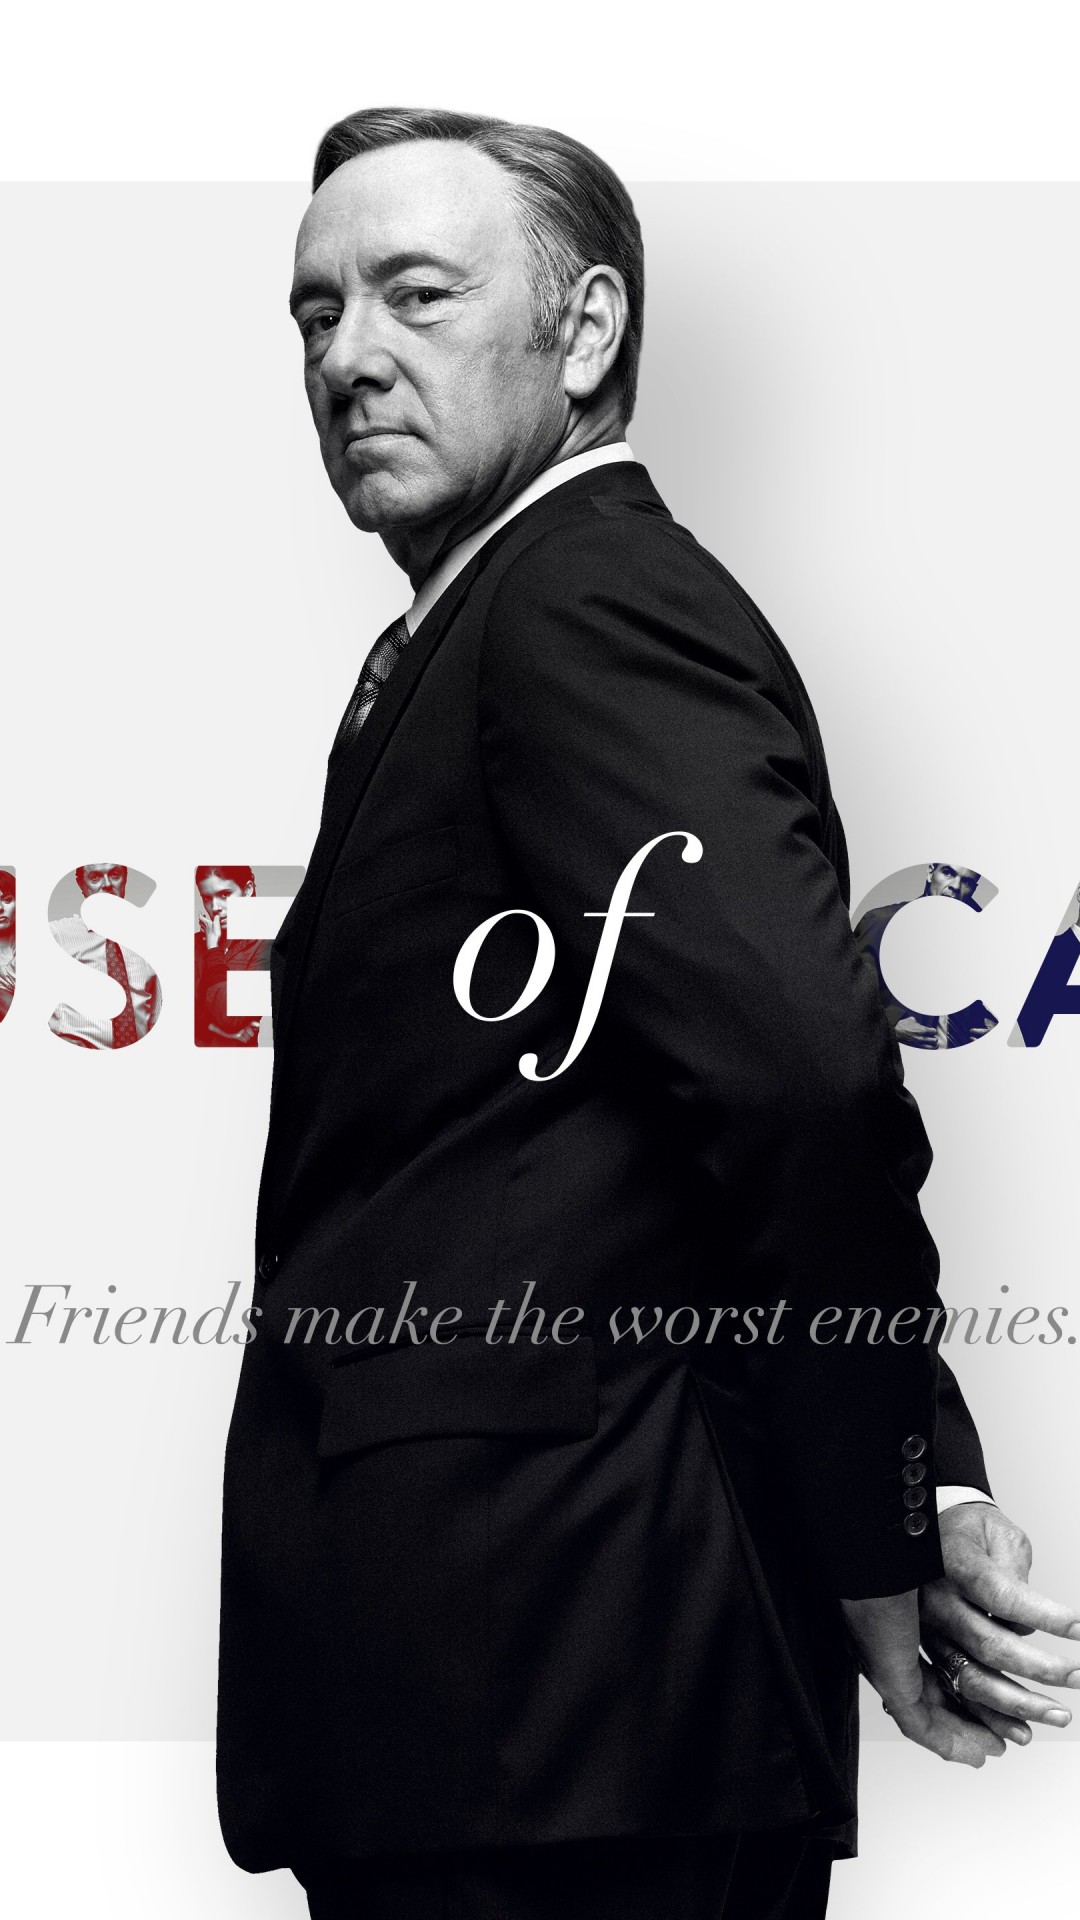 Frank Underwood - House of Cards Wallpaper for HTC One